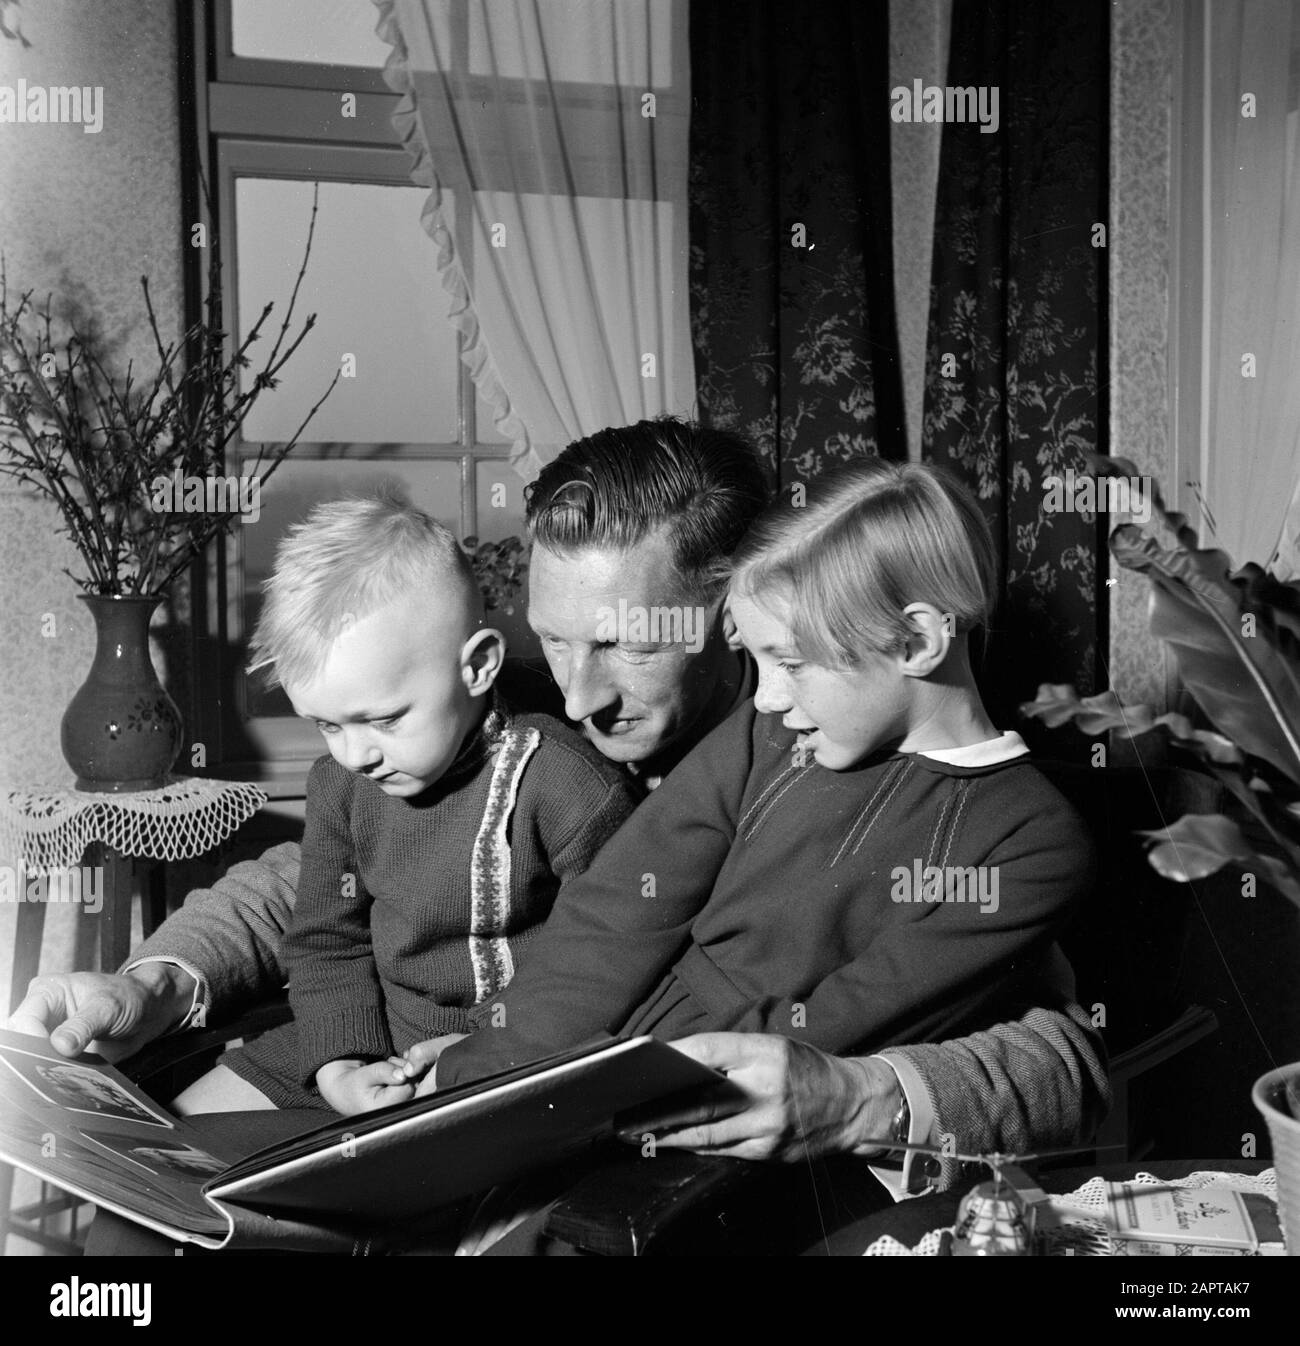 Gerard with his two children Gerrie and Marietje on lap while viewing a photo album Annotation: Gerard de Jong survived only a fusillade on April 7, 1945 at Dronrijp Date: 1 January 1955 Location: Friesland, Leeuwarden Keywords: pottery, books, interiors, children, tables Personal name: Young, Gerard de, Jong, Gerrie de Stock Photo